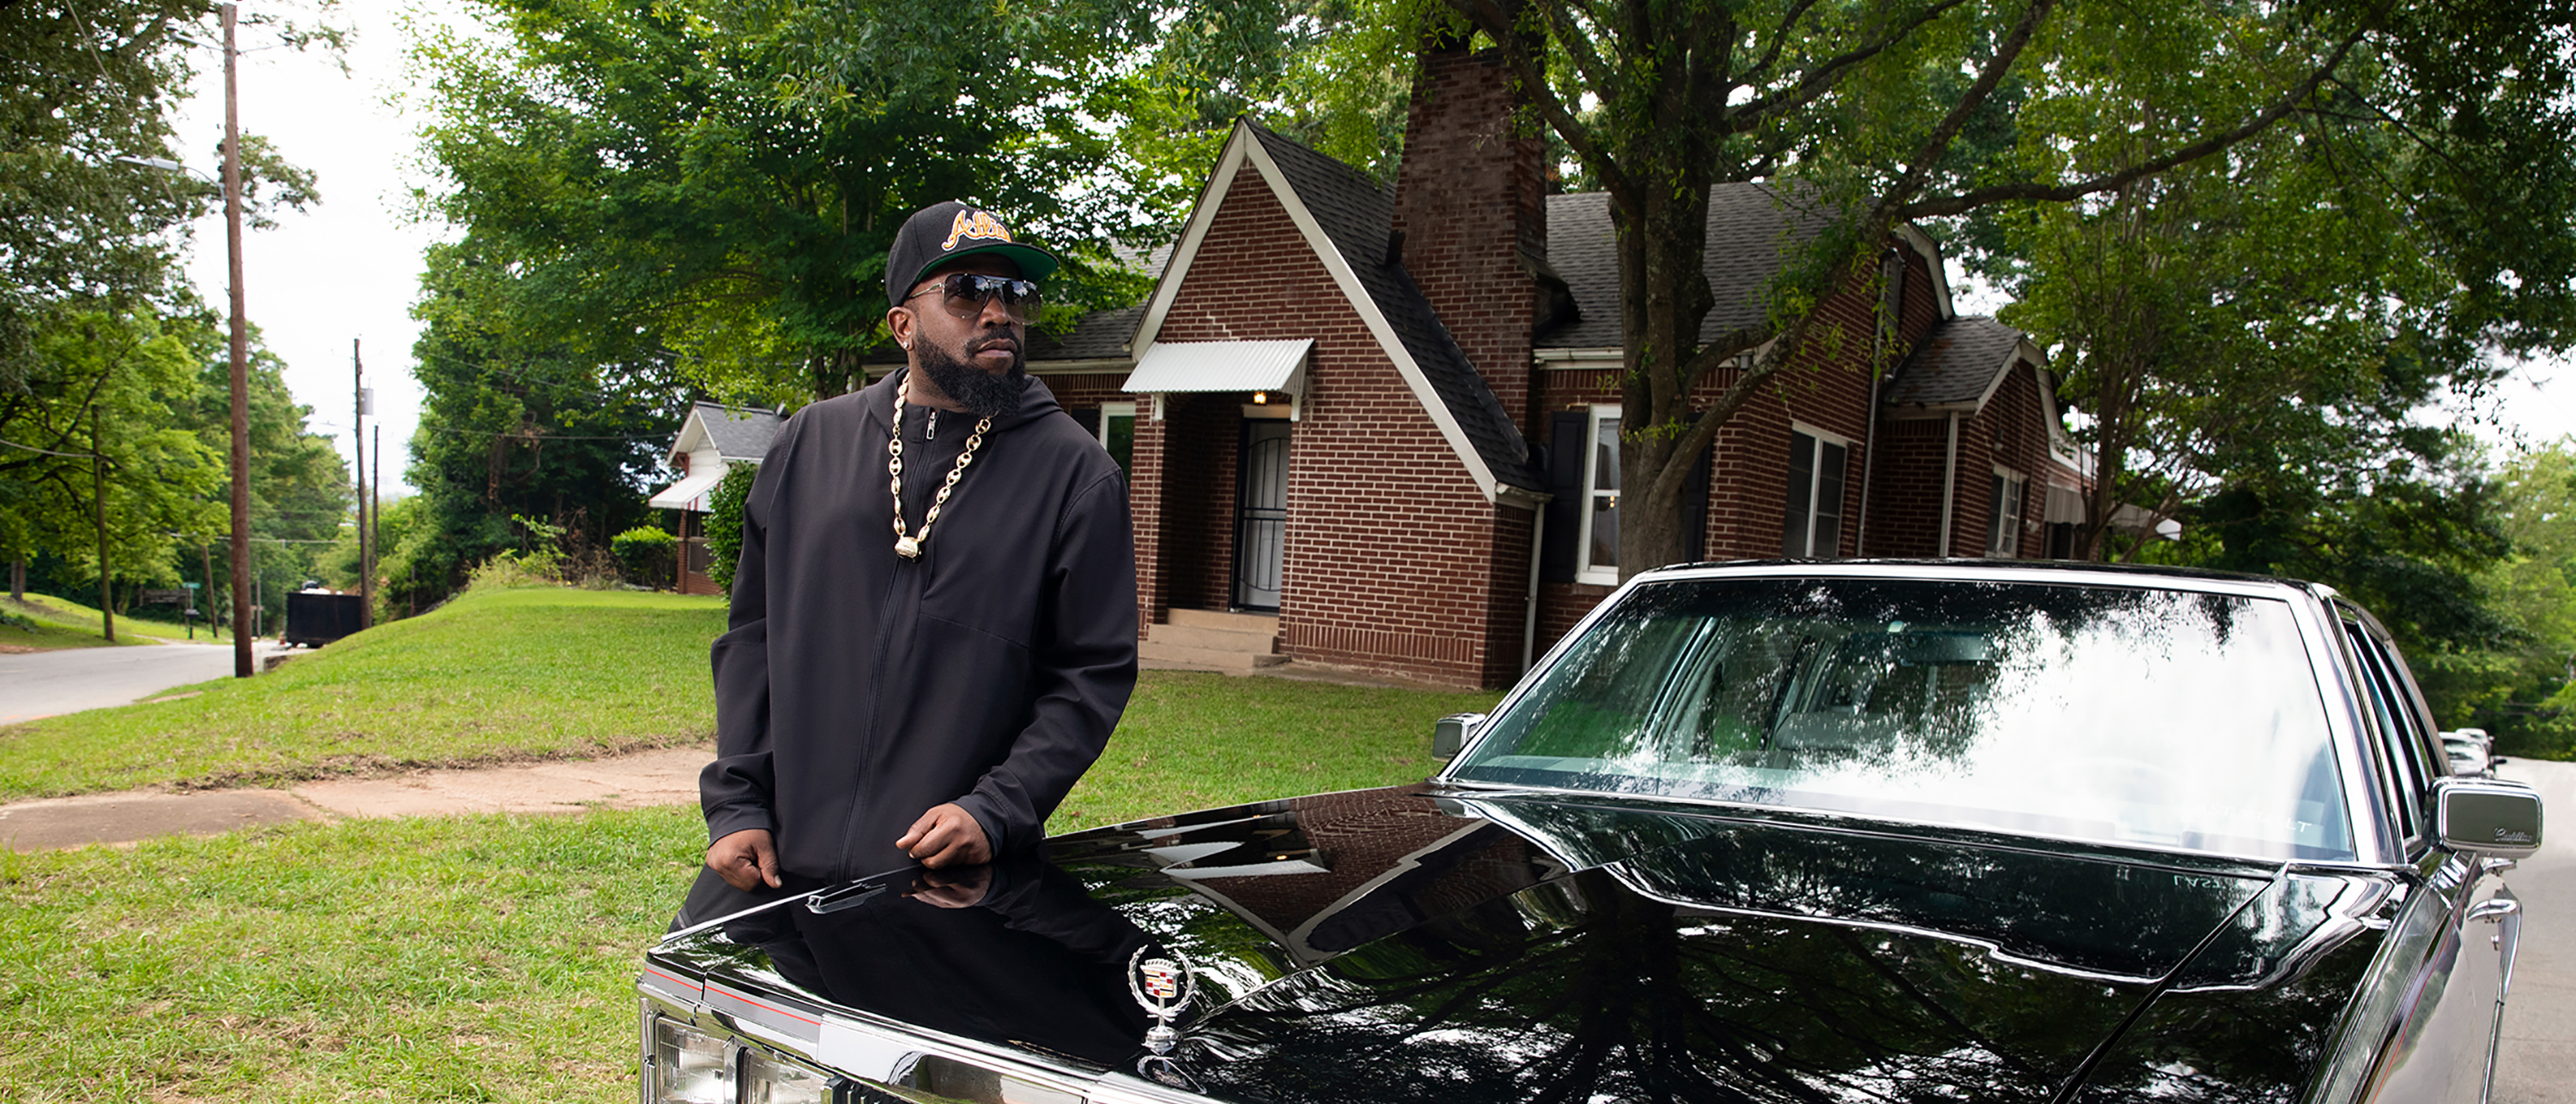 Big Boi standing alongside a vintage Cadillac car parked outside the Dungeon House